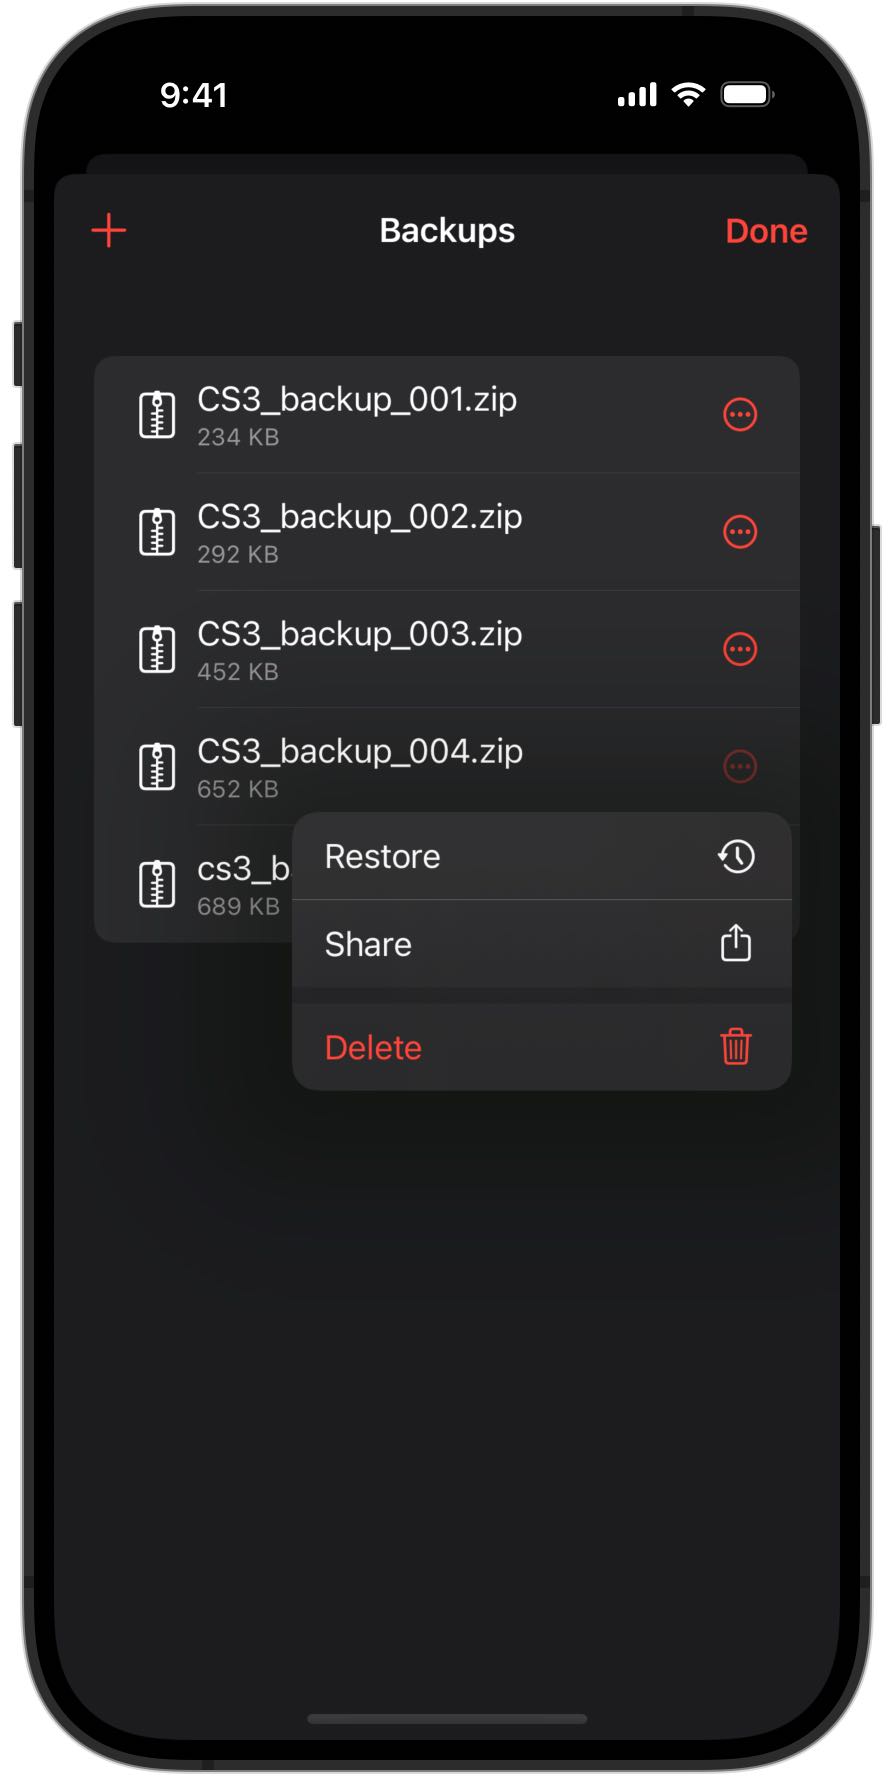 Screenshot of an iPhone showing backup options in RailControl Pro